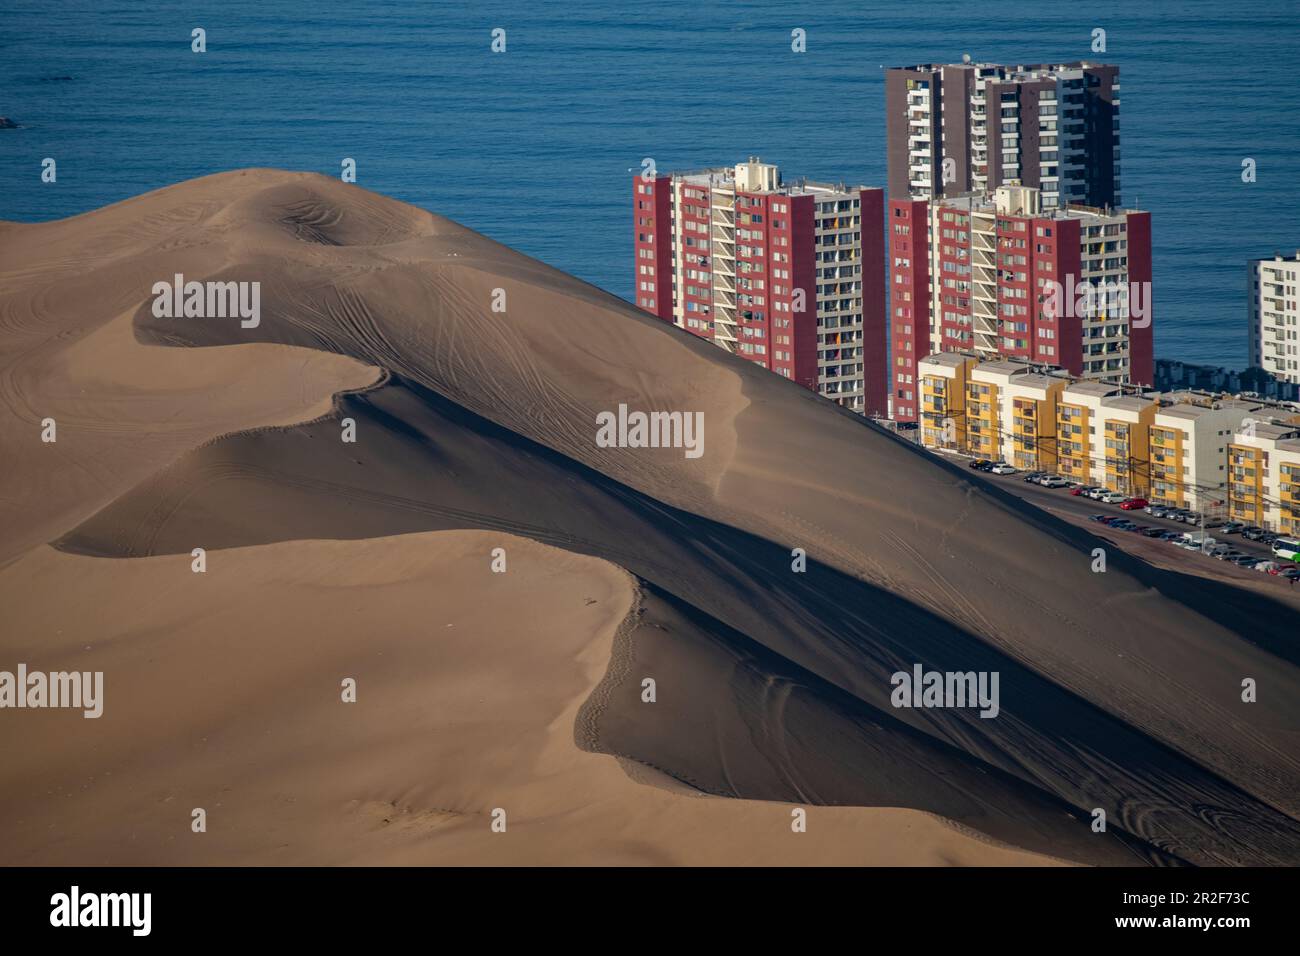 A massive sand dune and skyscrapers on the coast, seen from the inland road, near Iquique, Tarapaca, Chile, South America Stock Photo